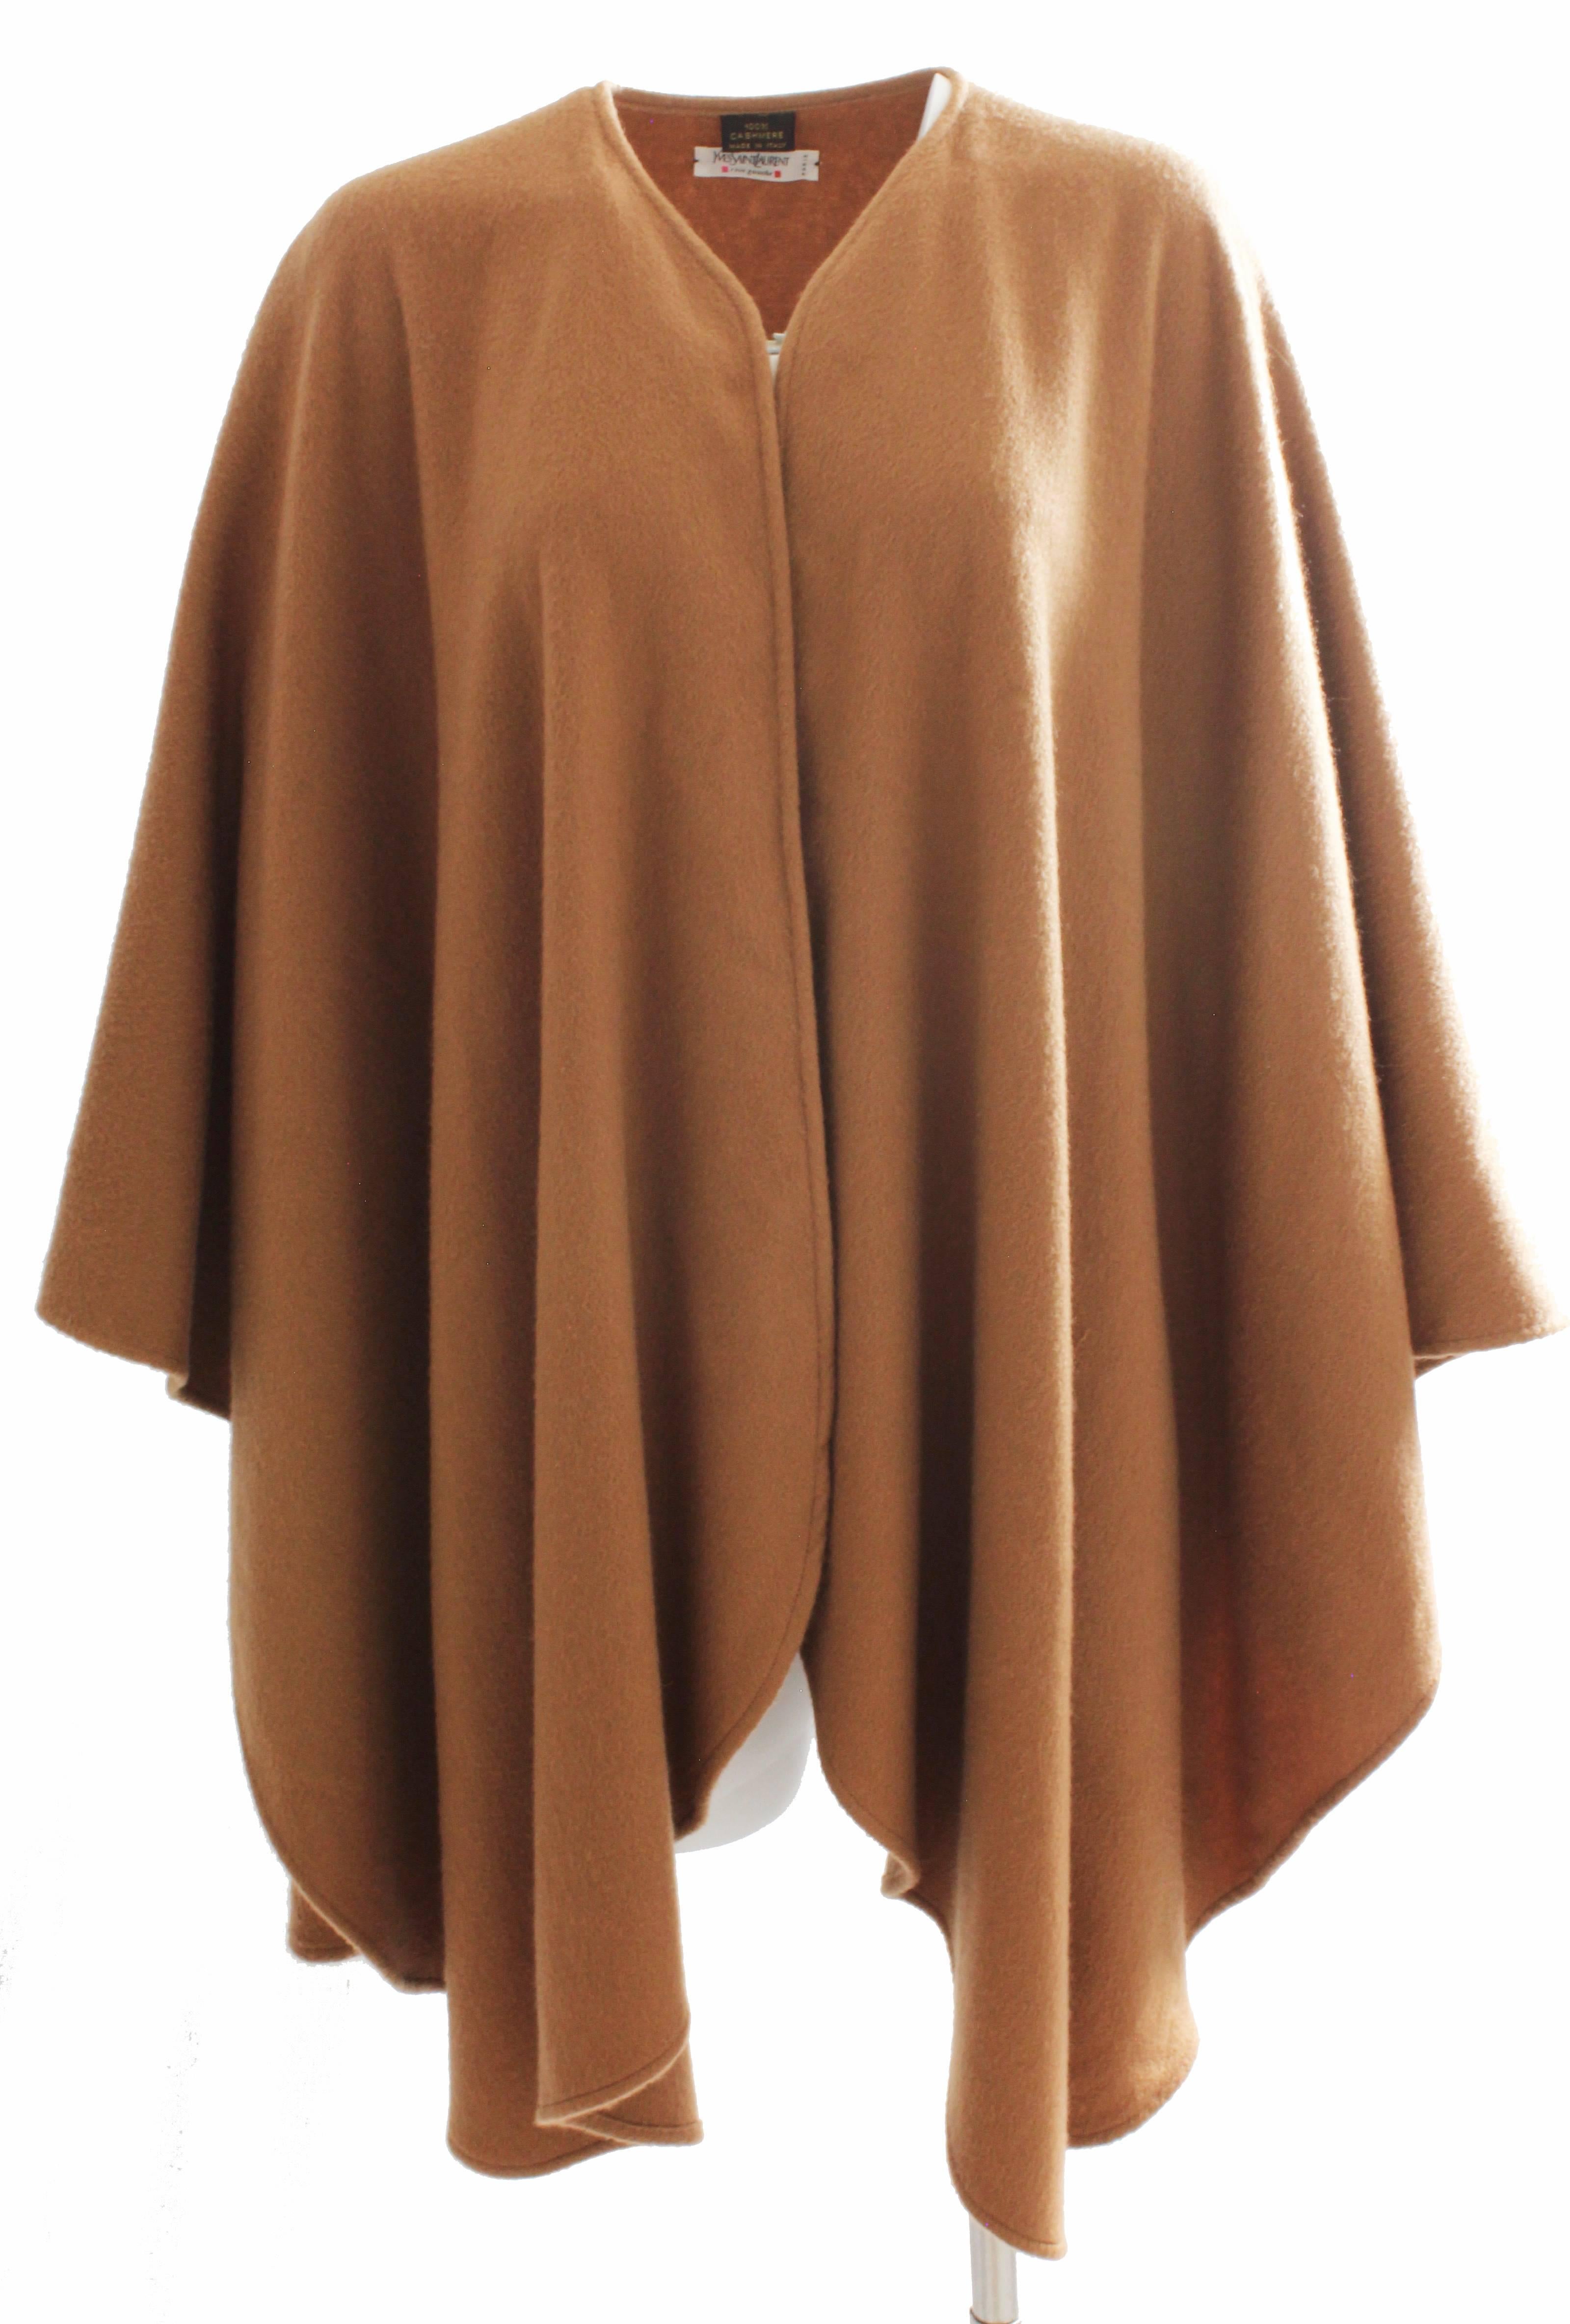 Yves Saint Laurent Cashmere Wool Cape Poncho Fall 96 Runway YSL Rive Gauche In Good Condition In Port Saint Lucie, FL